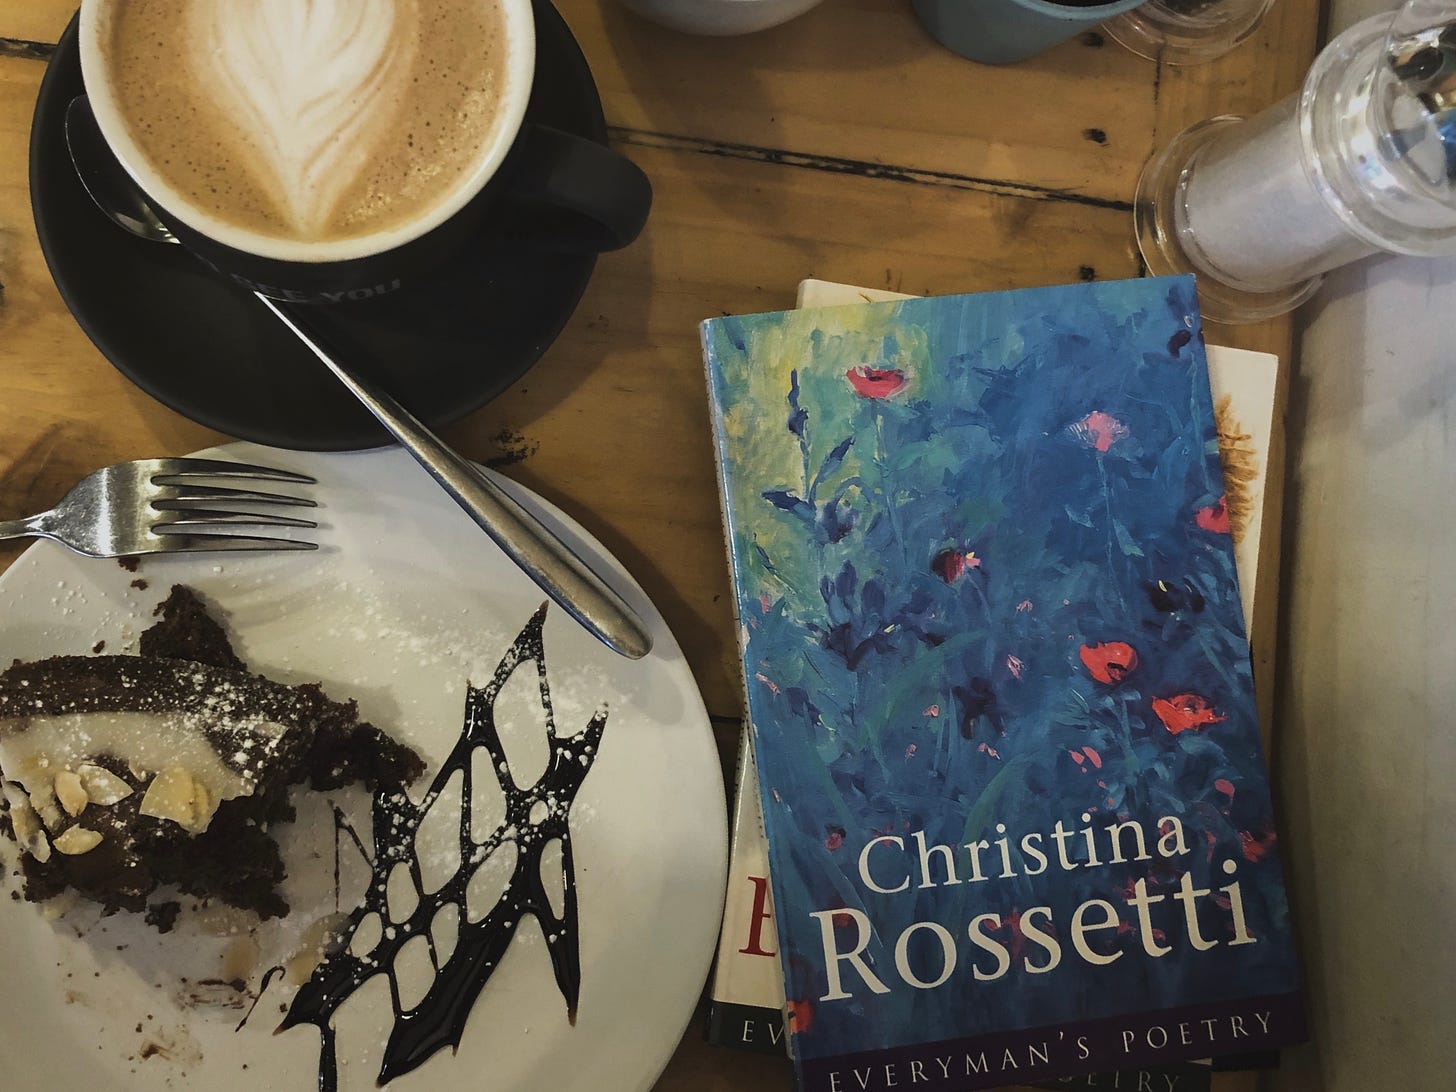 A cup of coffee with a collection of Christina Rossetti's poetry and cake